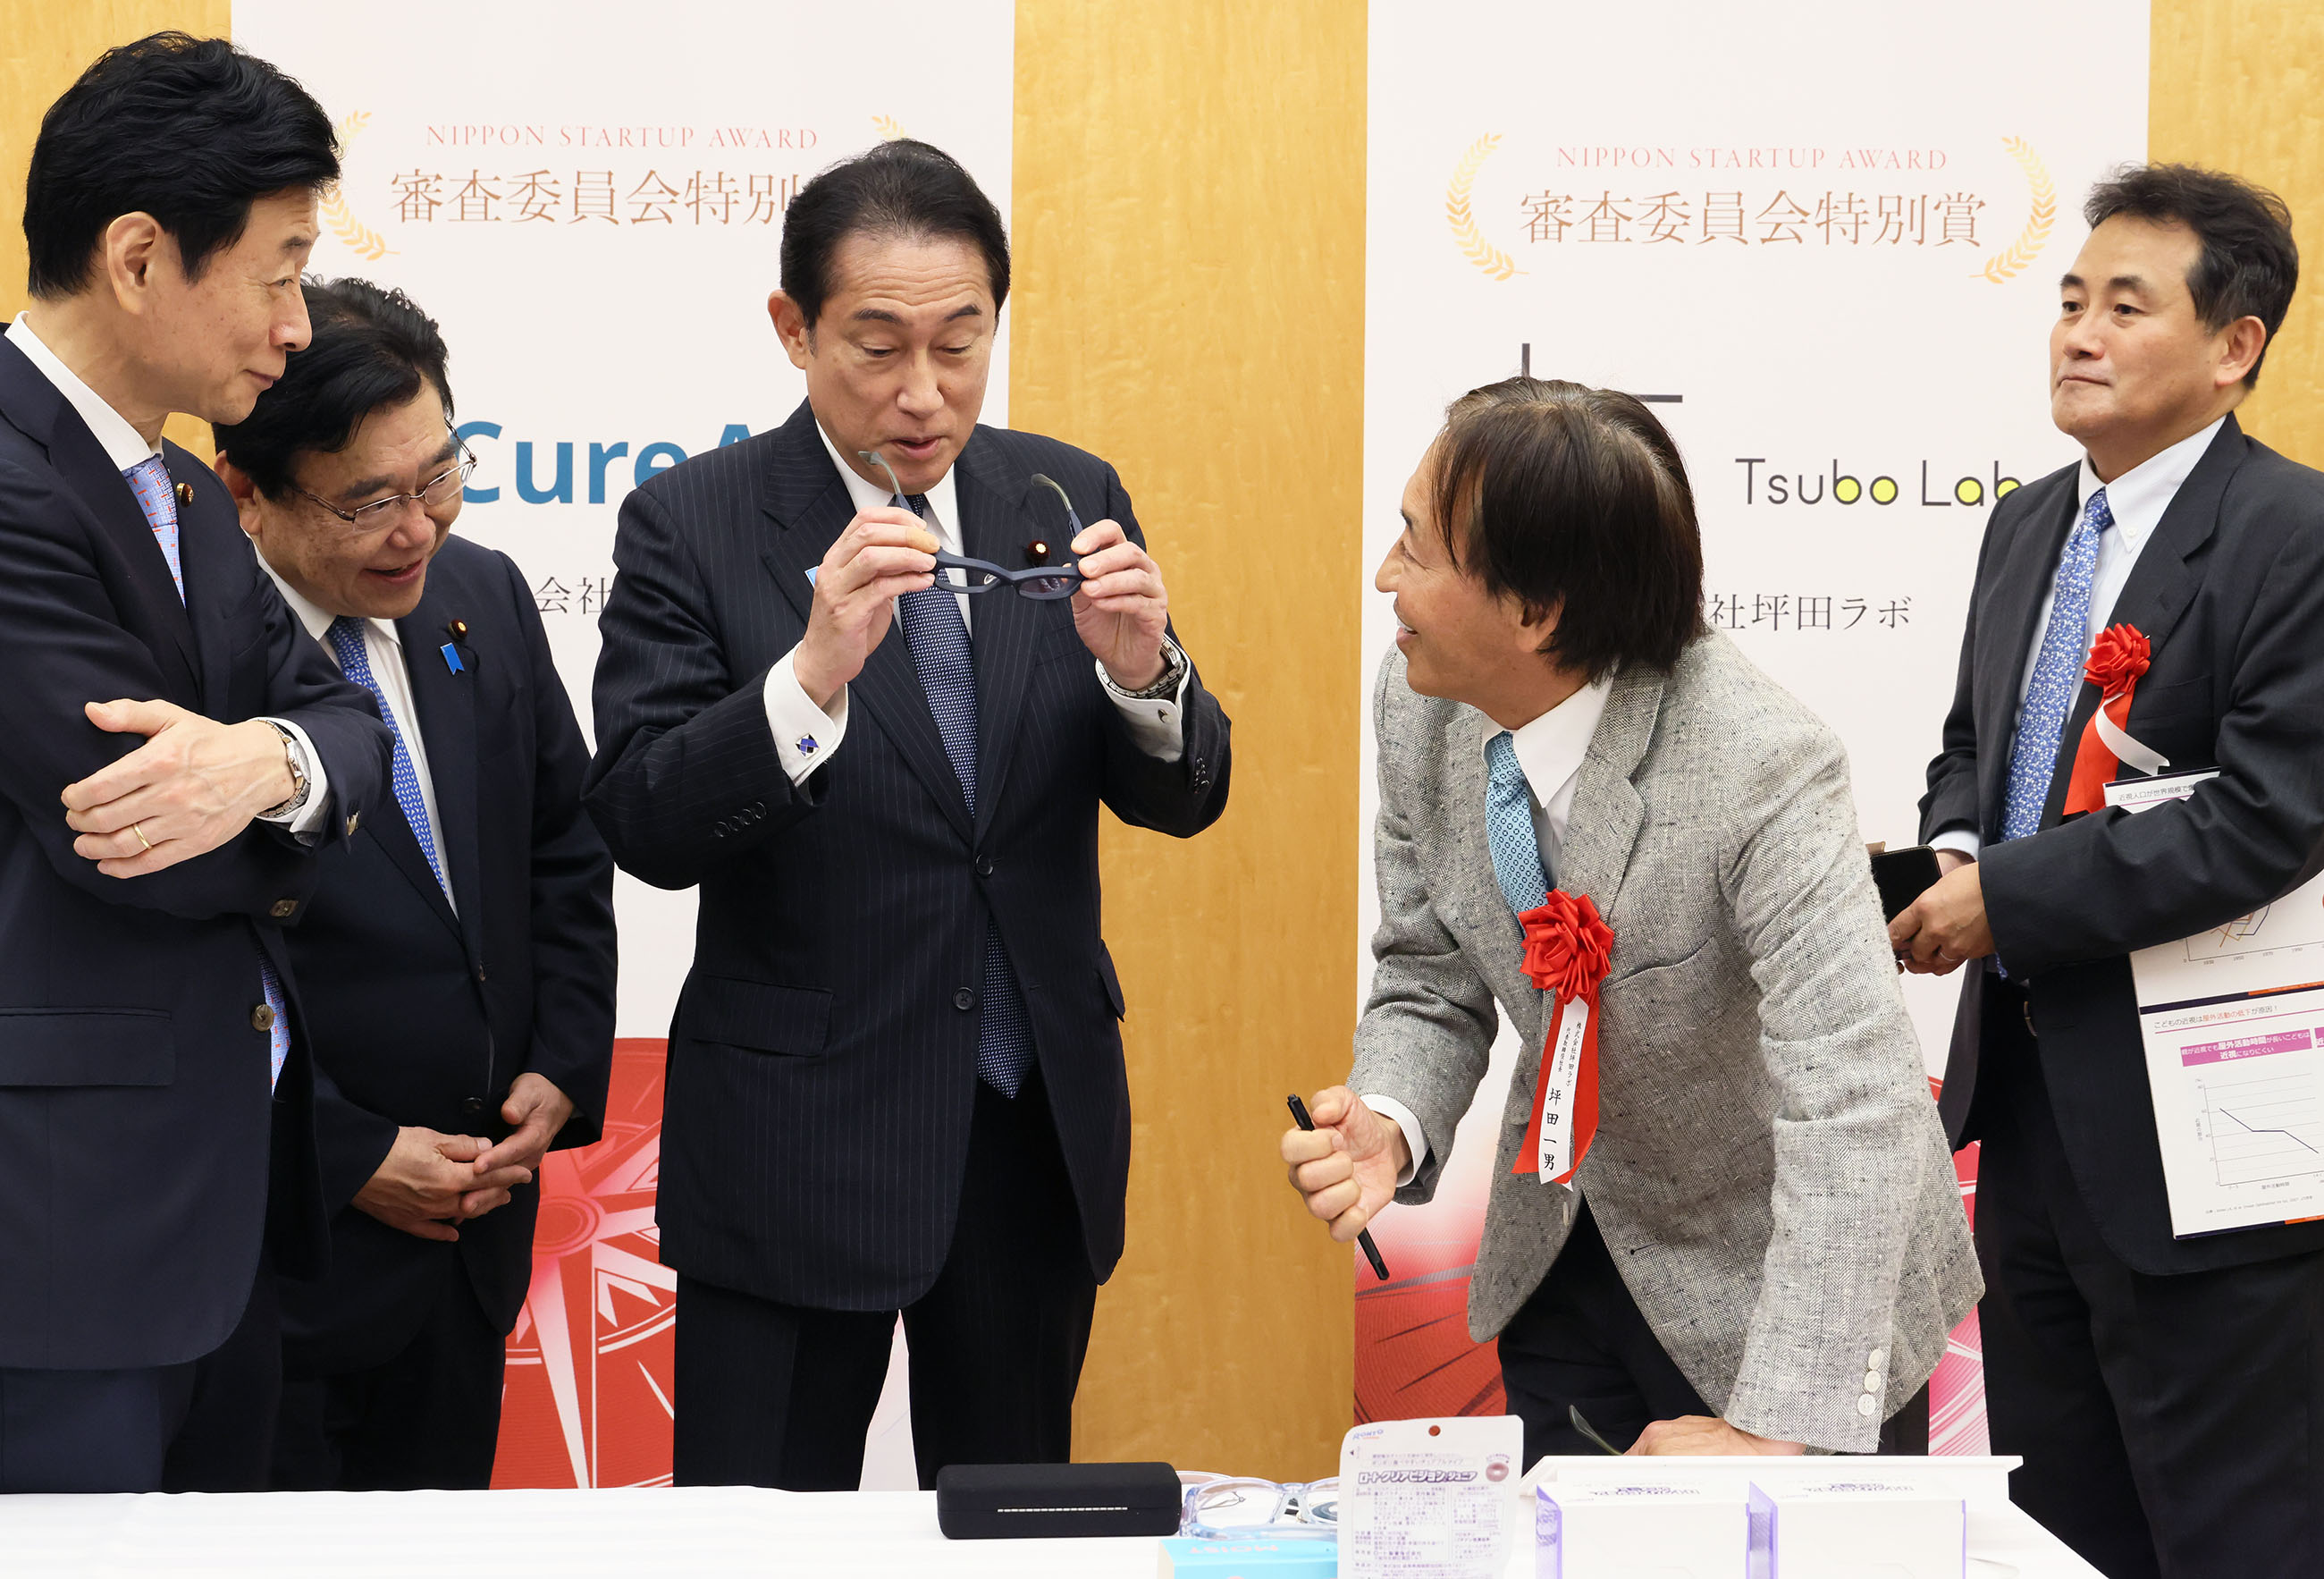 Prime Minister Kishida viewing the exhibition booth of award winners (10)